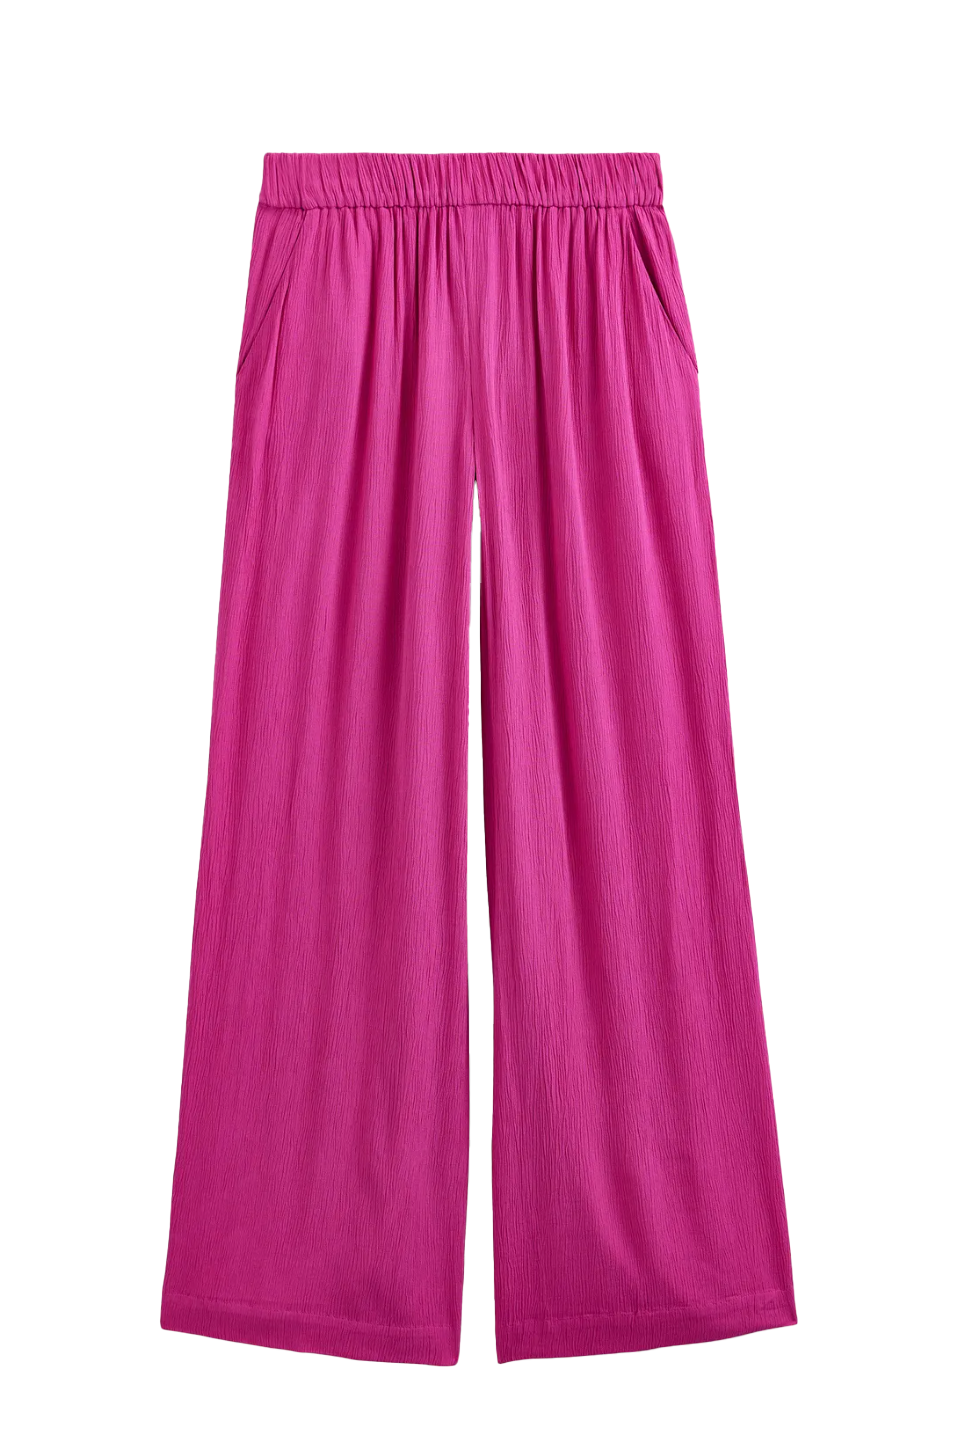 Boden Crinkle Wide Trousers